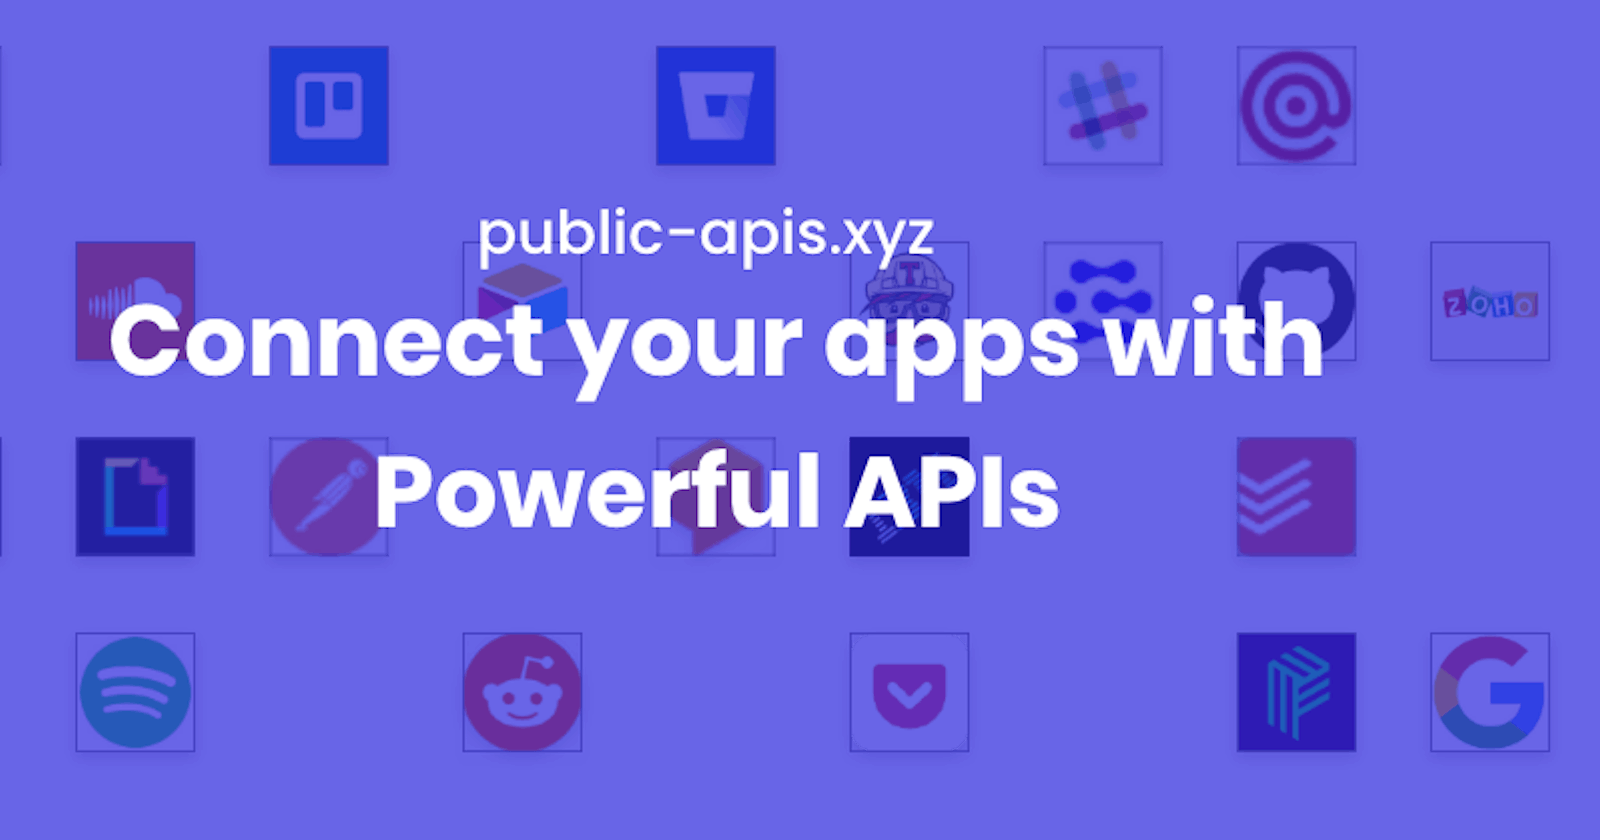 Connect your apps with Powerful APIs